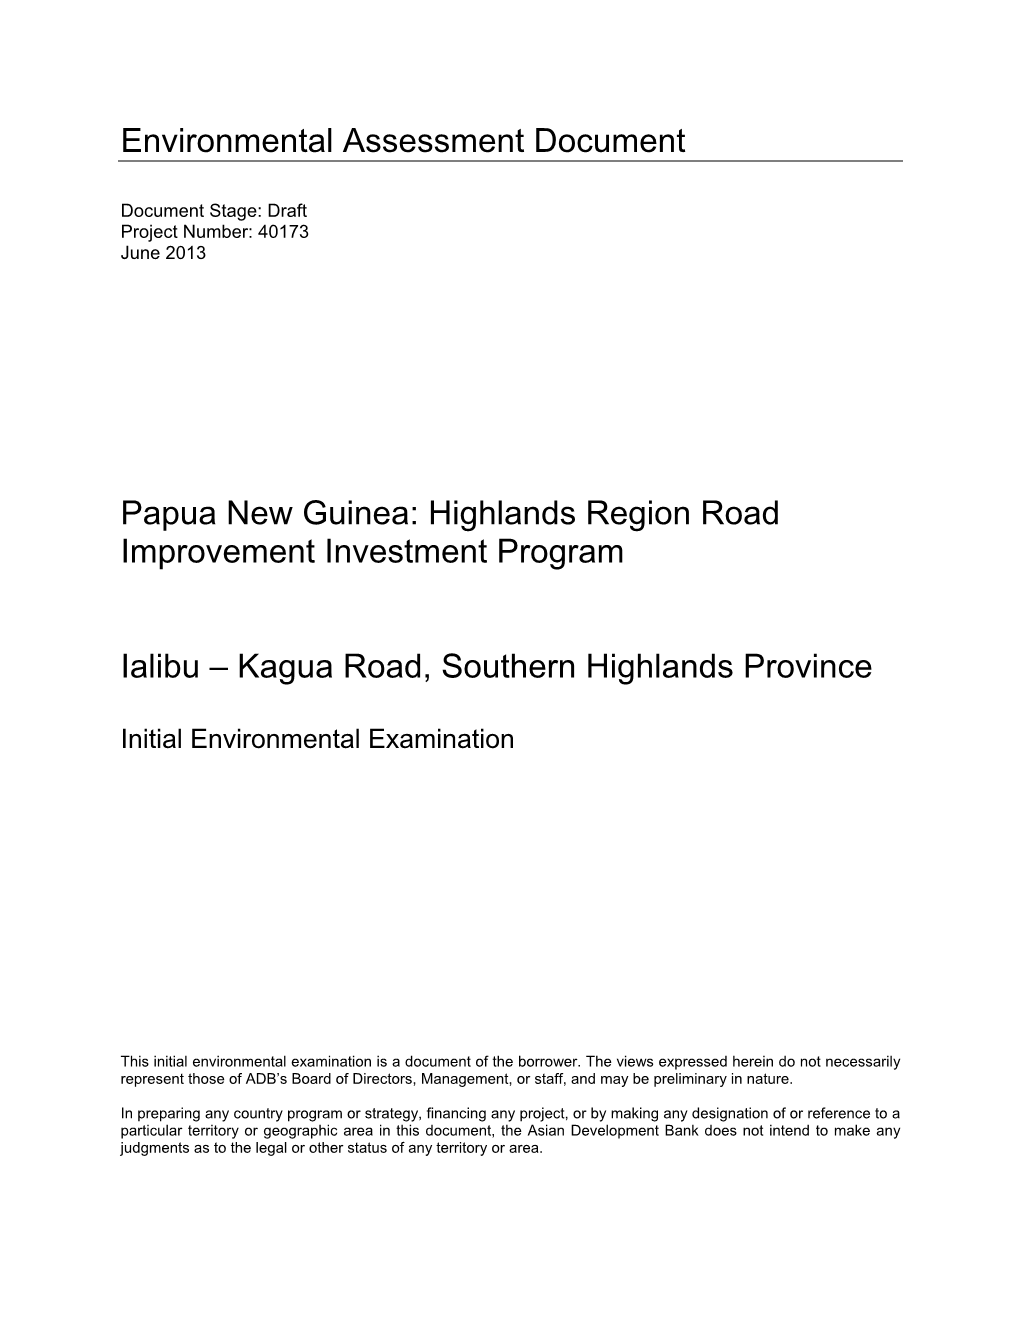 Kagua Road, Southern Highlands Province